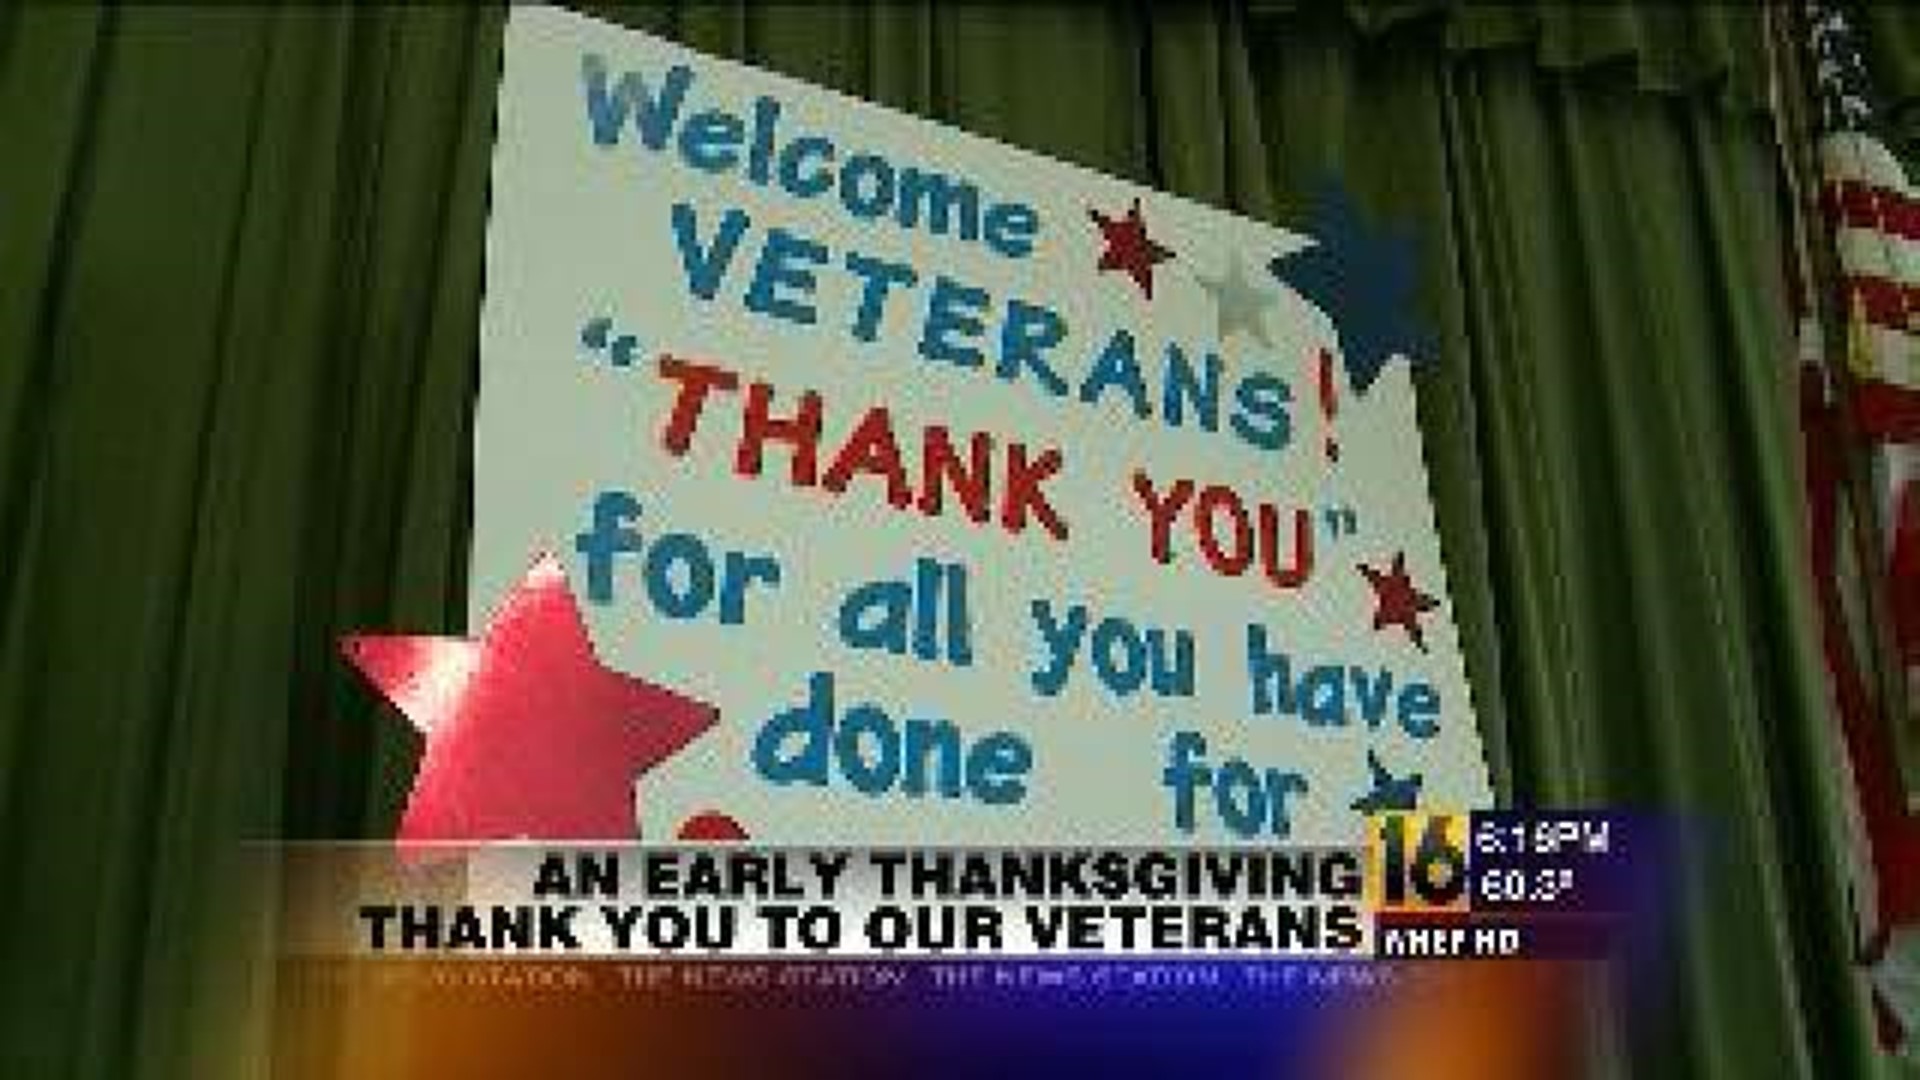 An Early Thanksgiving Thank You to our Veterans